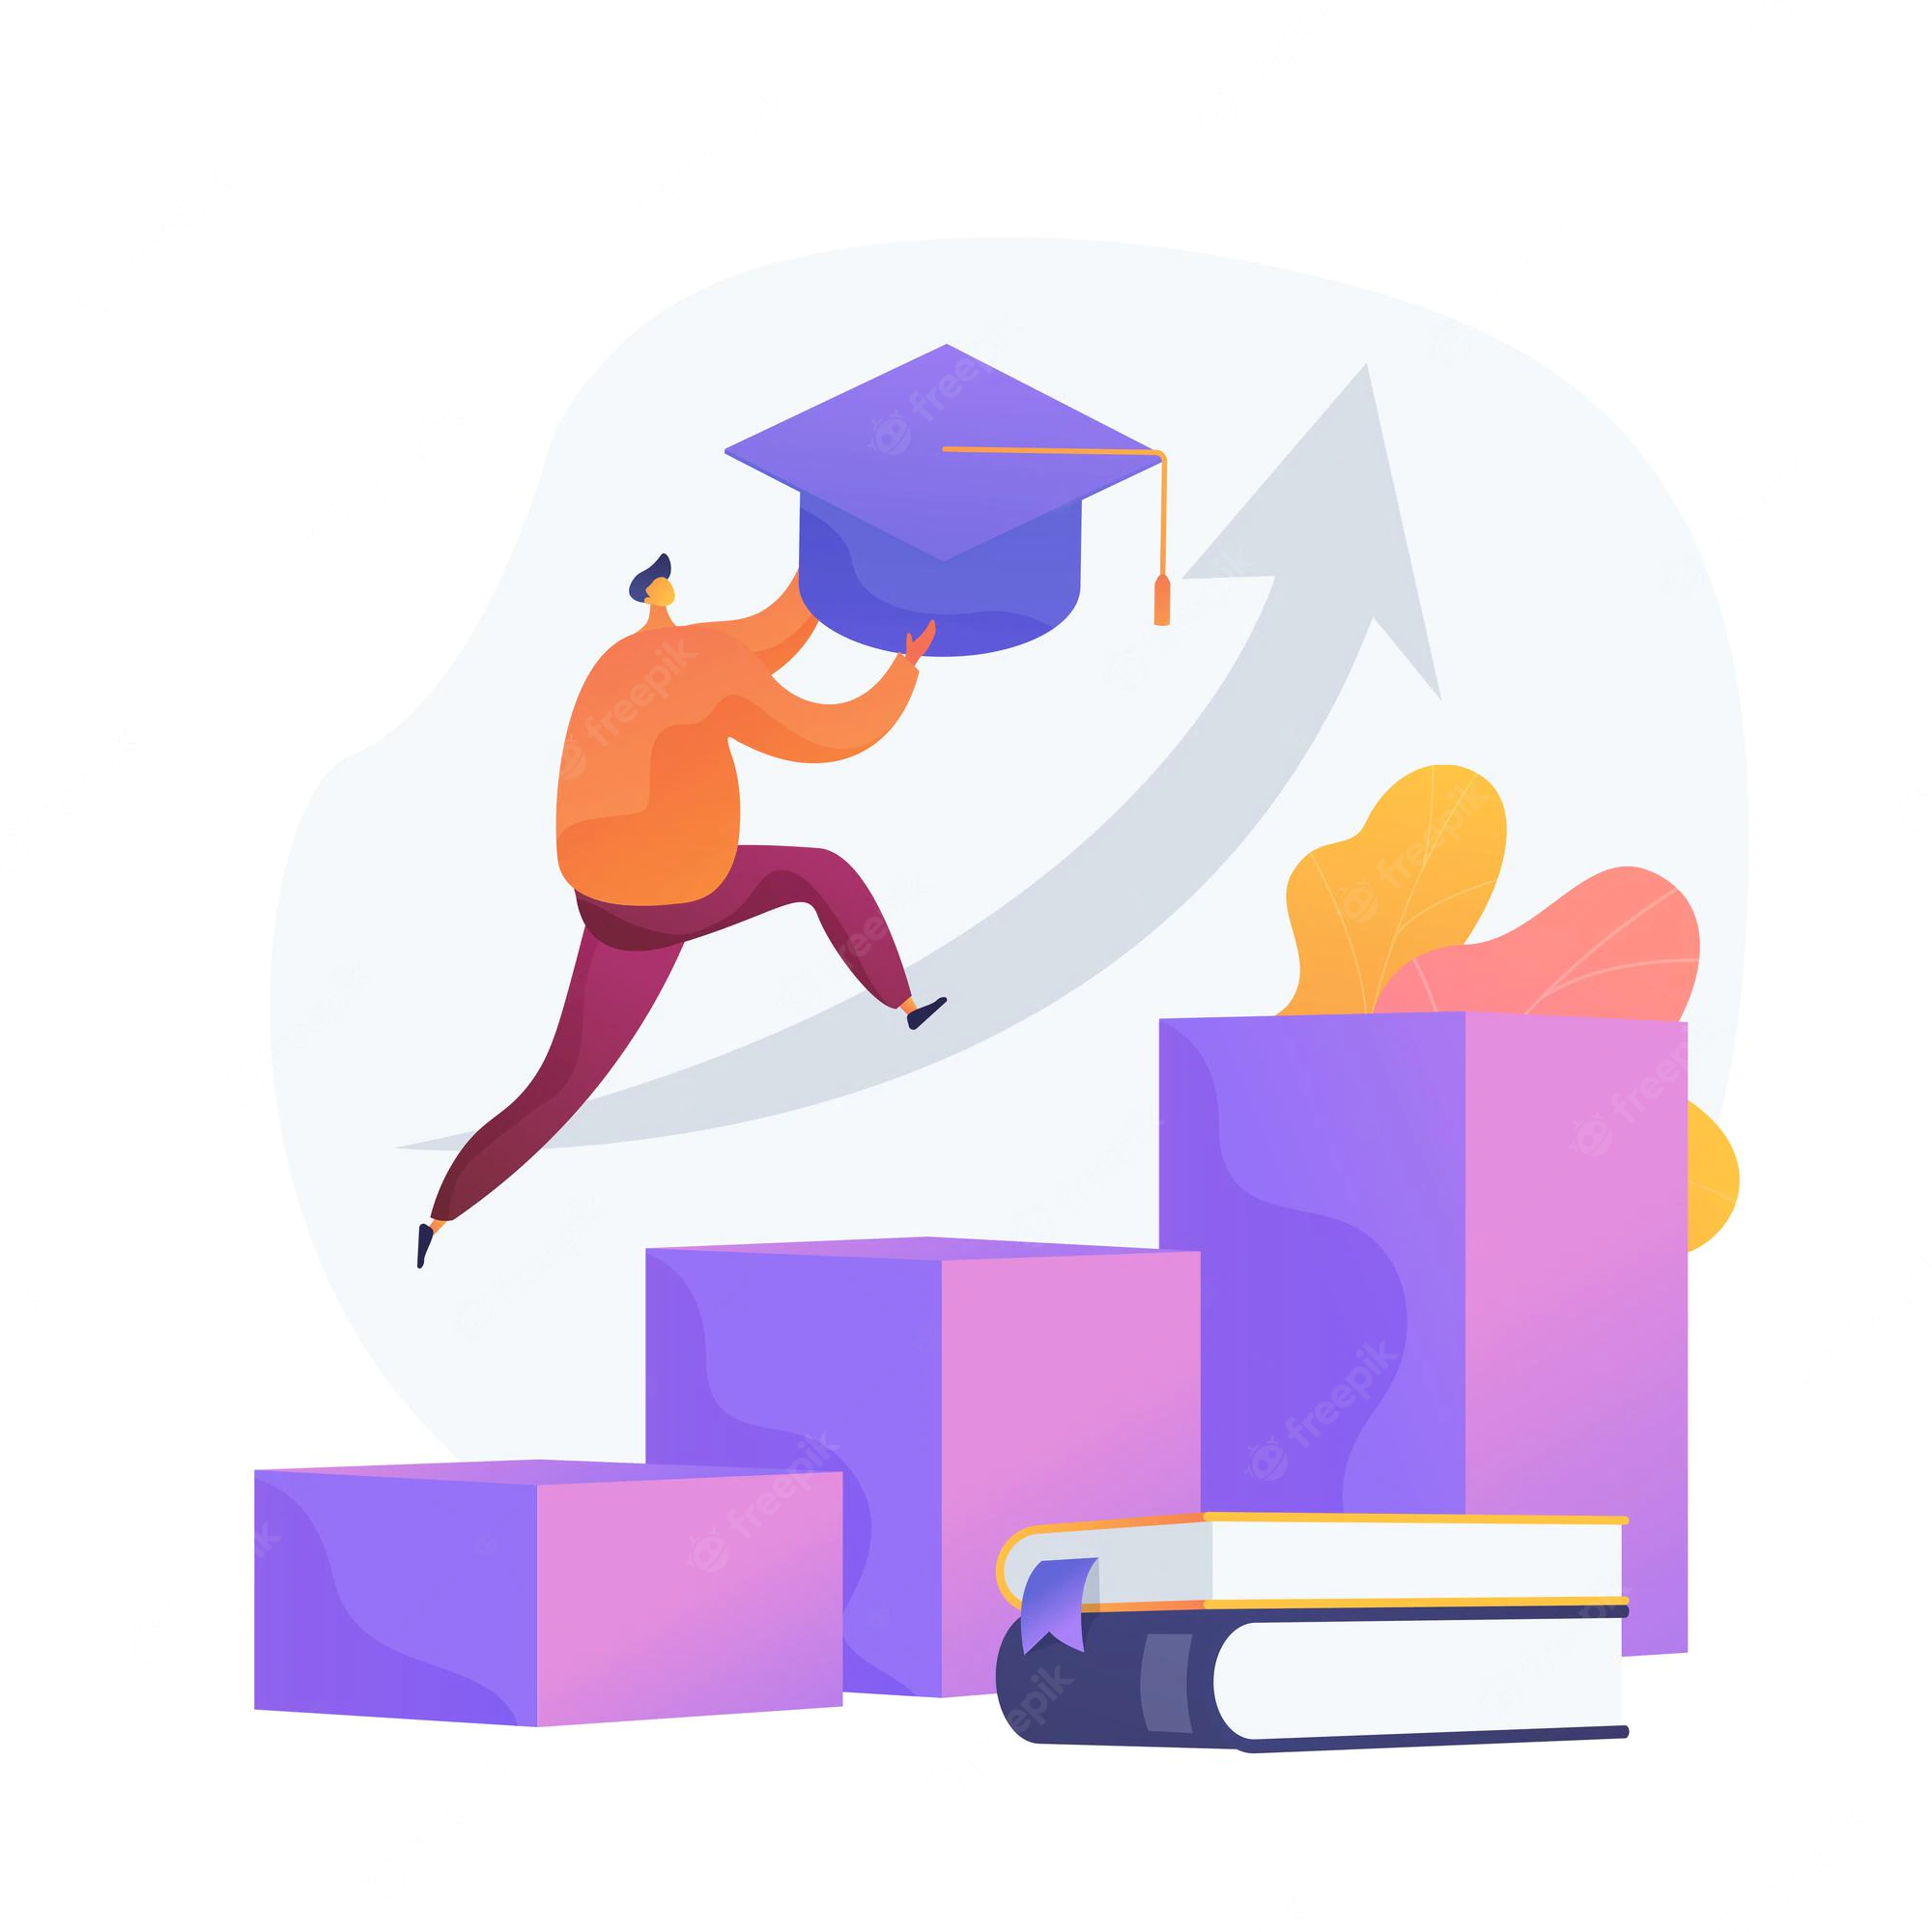 university-graduation-achievement-higher-education-academic-degree-successful-student-jumping-holding-mortarboard-personal-development_335657-3459